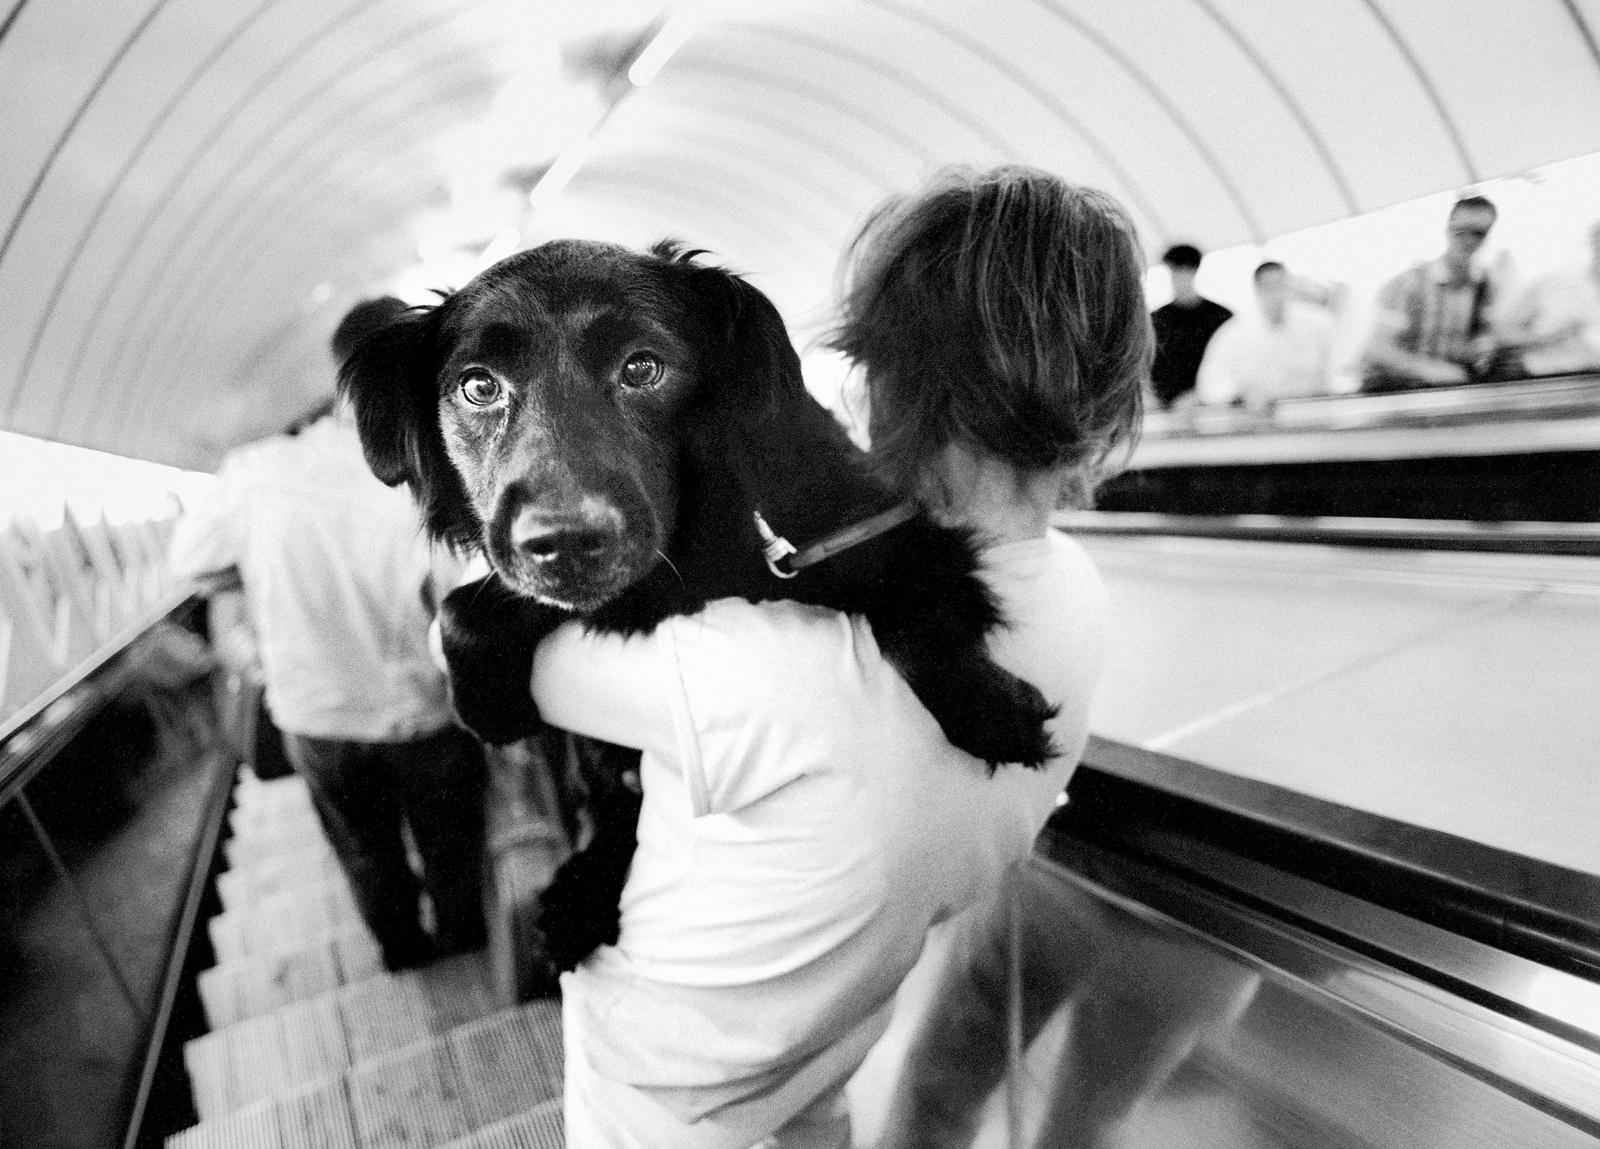  Metro Dog  - Signed limited edition archival pigment print  - Edition of 5

This image was captured on film. 
The negative was scanned creating a digital file which was then printed on Hahnemühle Photo Rag® Baryta 315 gsm (Acid-free and lignin-free